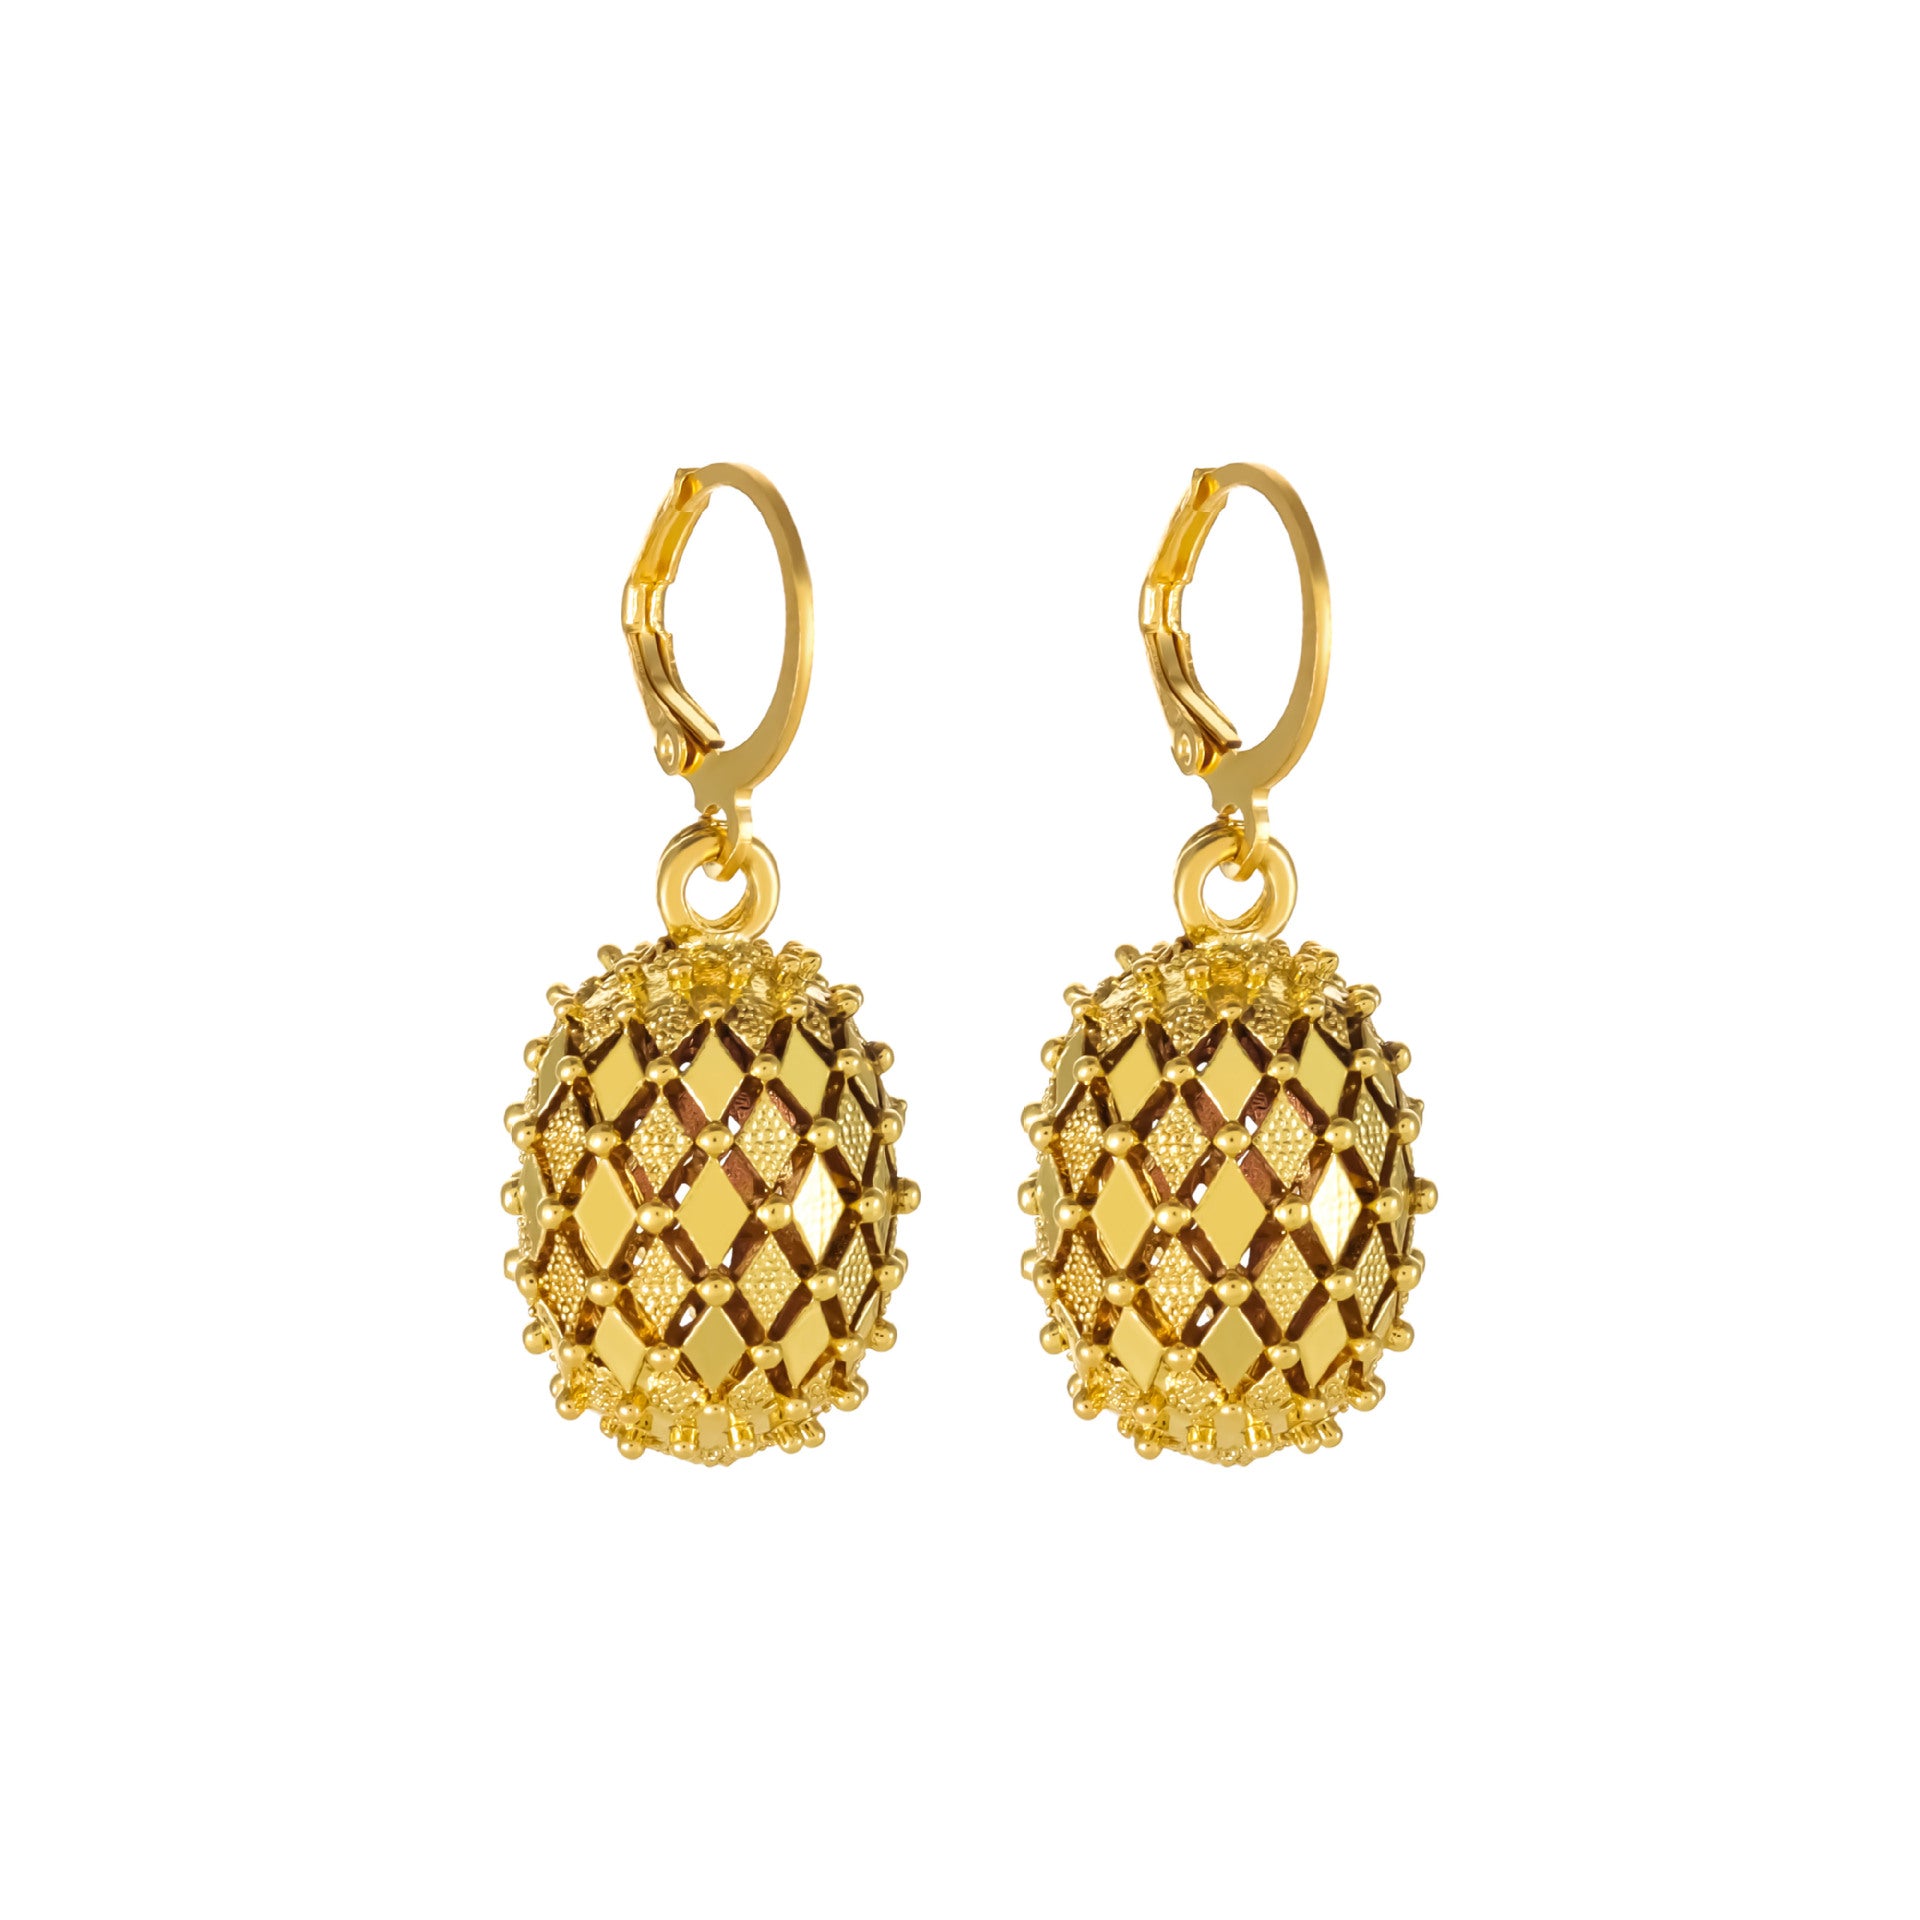 Hollow Copper Ball Earrings Gold Plated